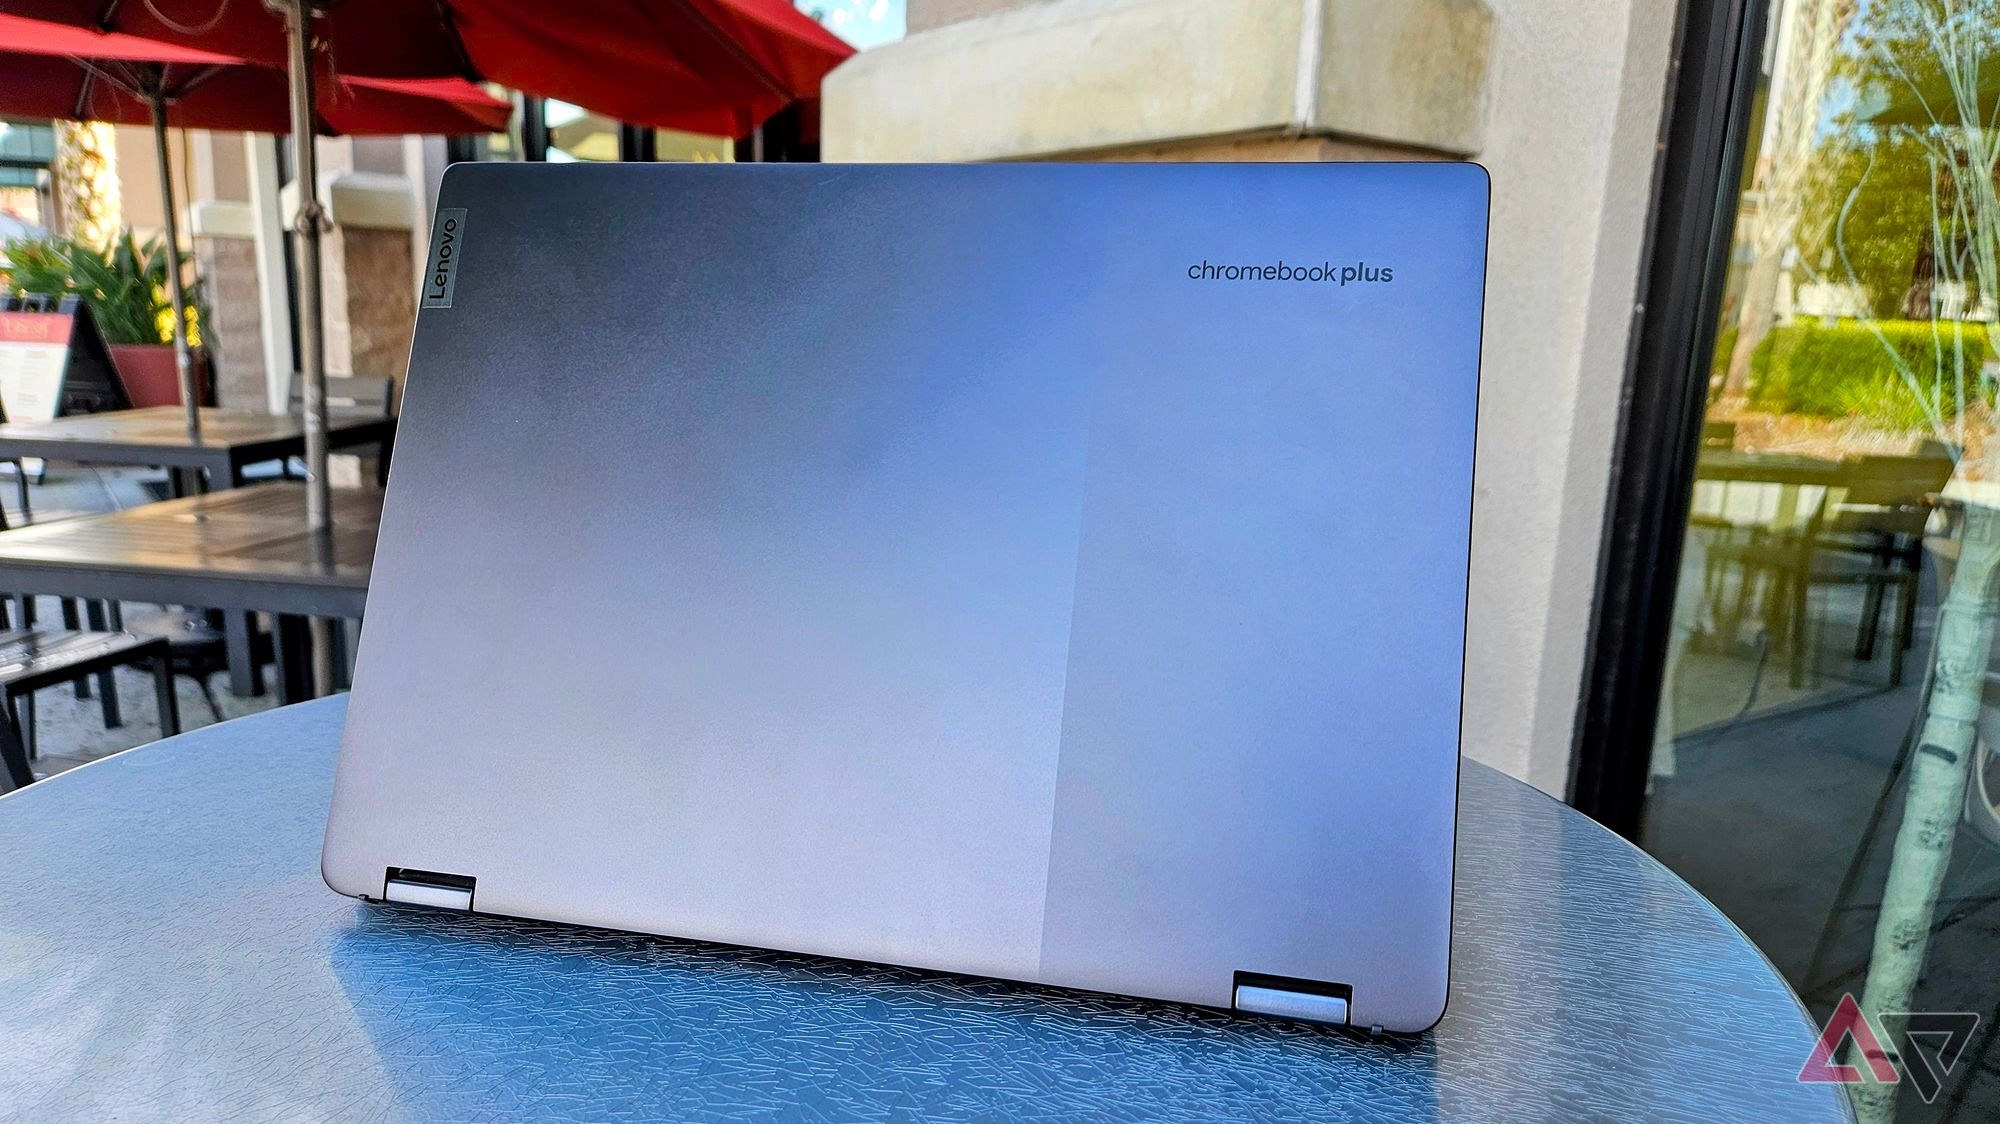 The Lenovo Chromebook Plus Flex 5i open and facing away on an cafe table